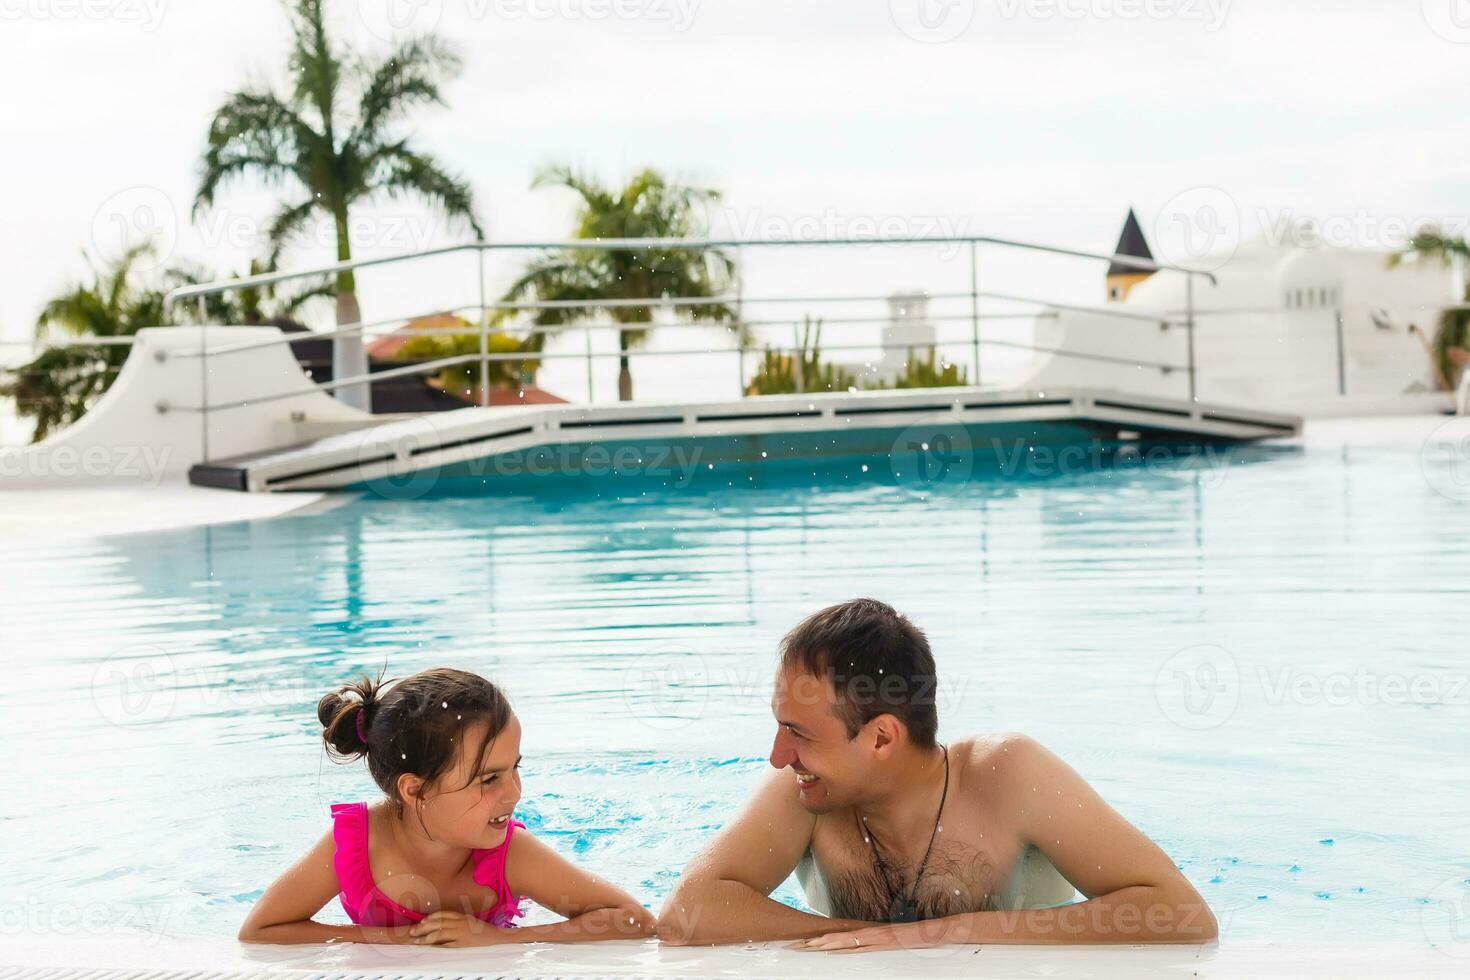 Father playing with his daughter in swimming pool photo